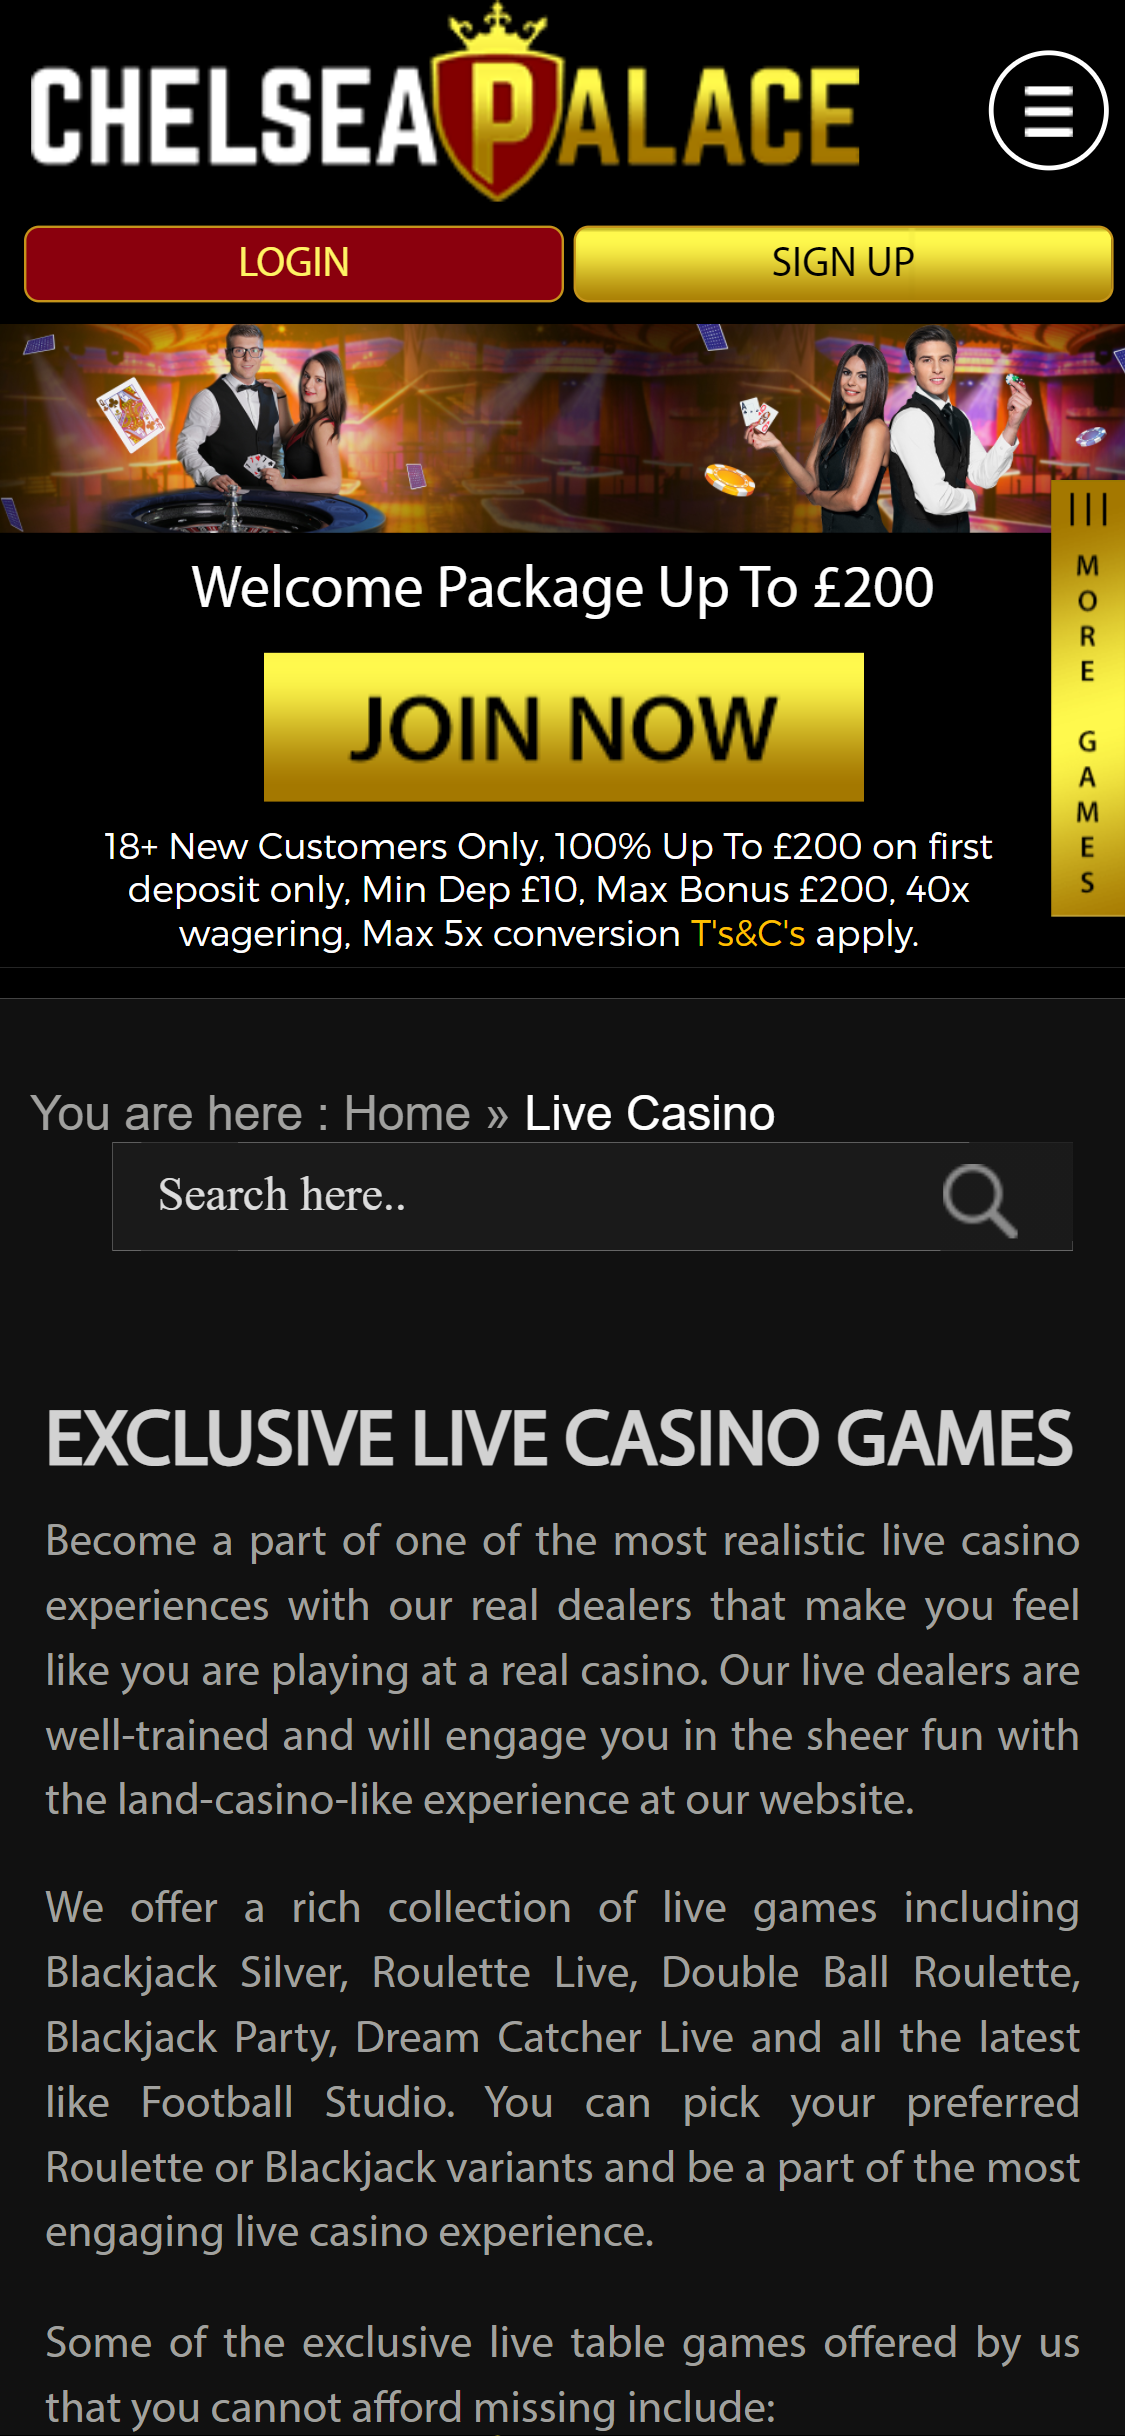 Chelsea Palace Casino Mobile Live Dealer Games Review